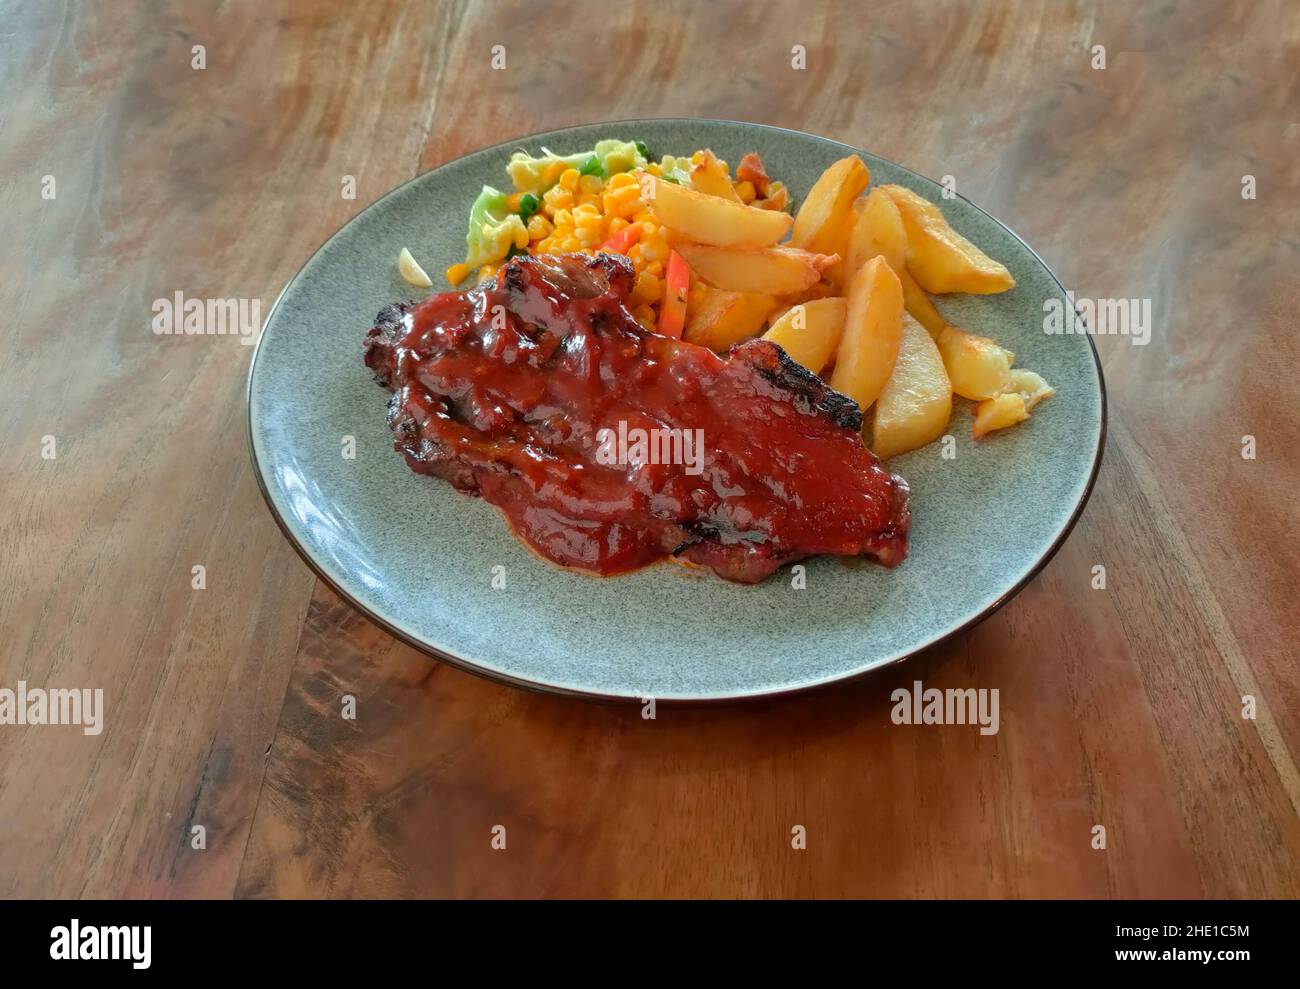 Sirloin steak with french fries. Top view Stock Photo